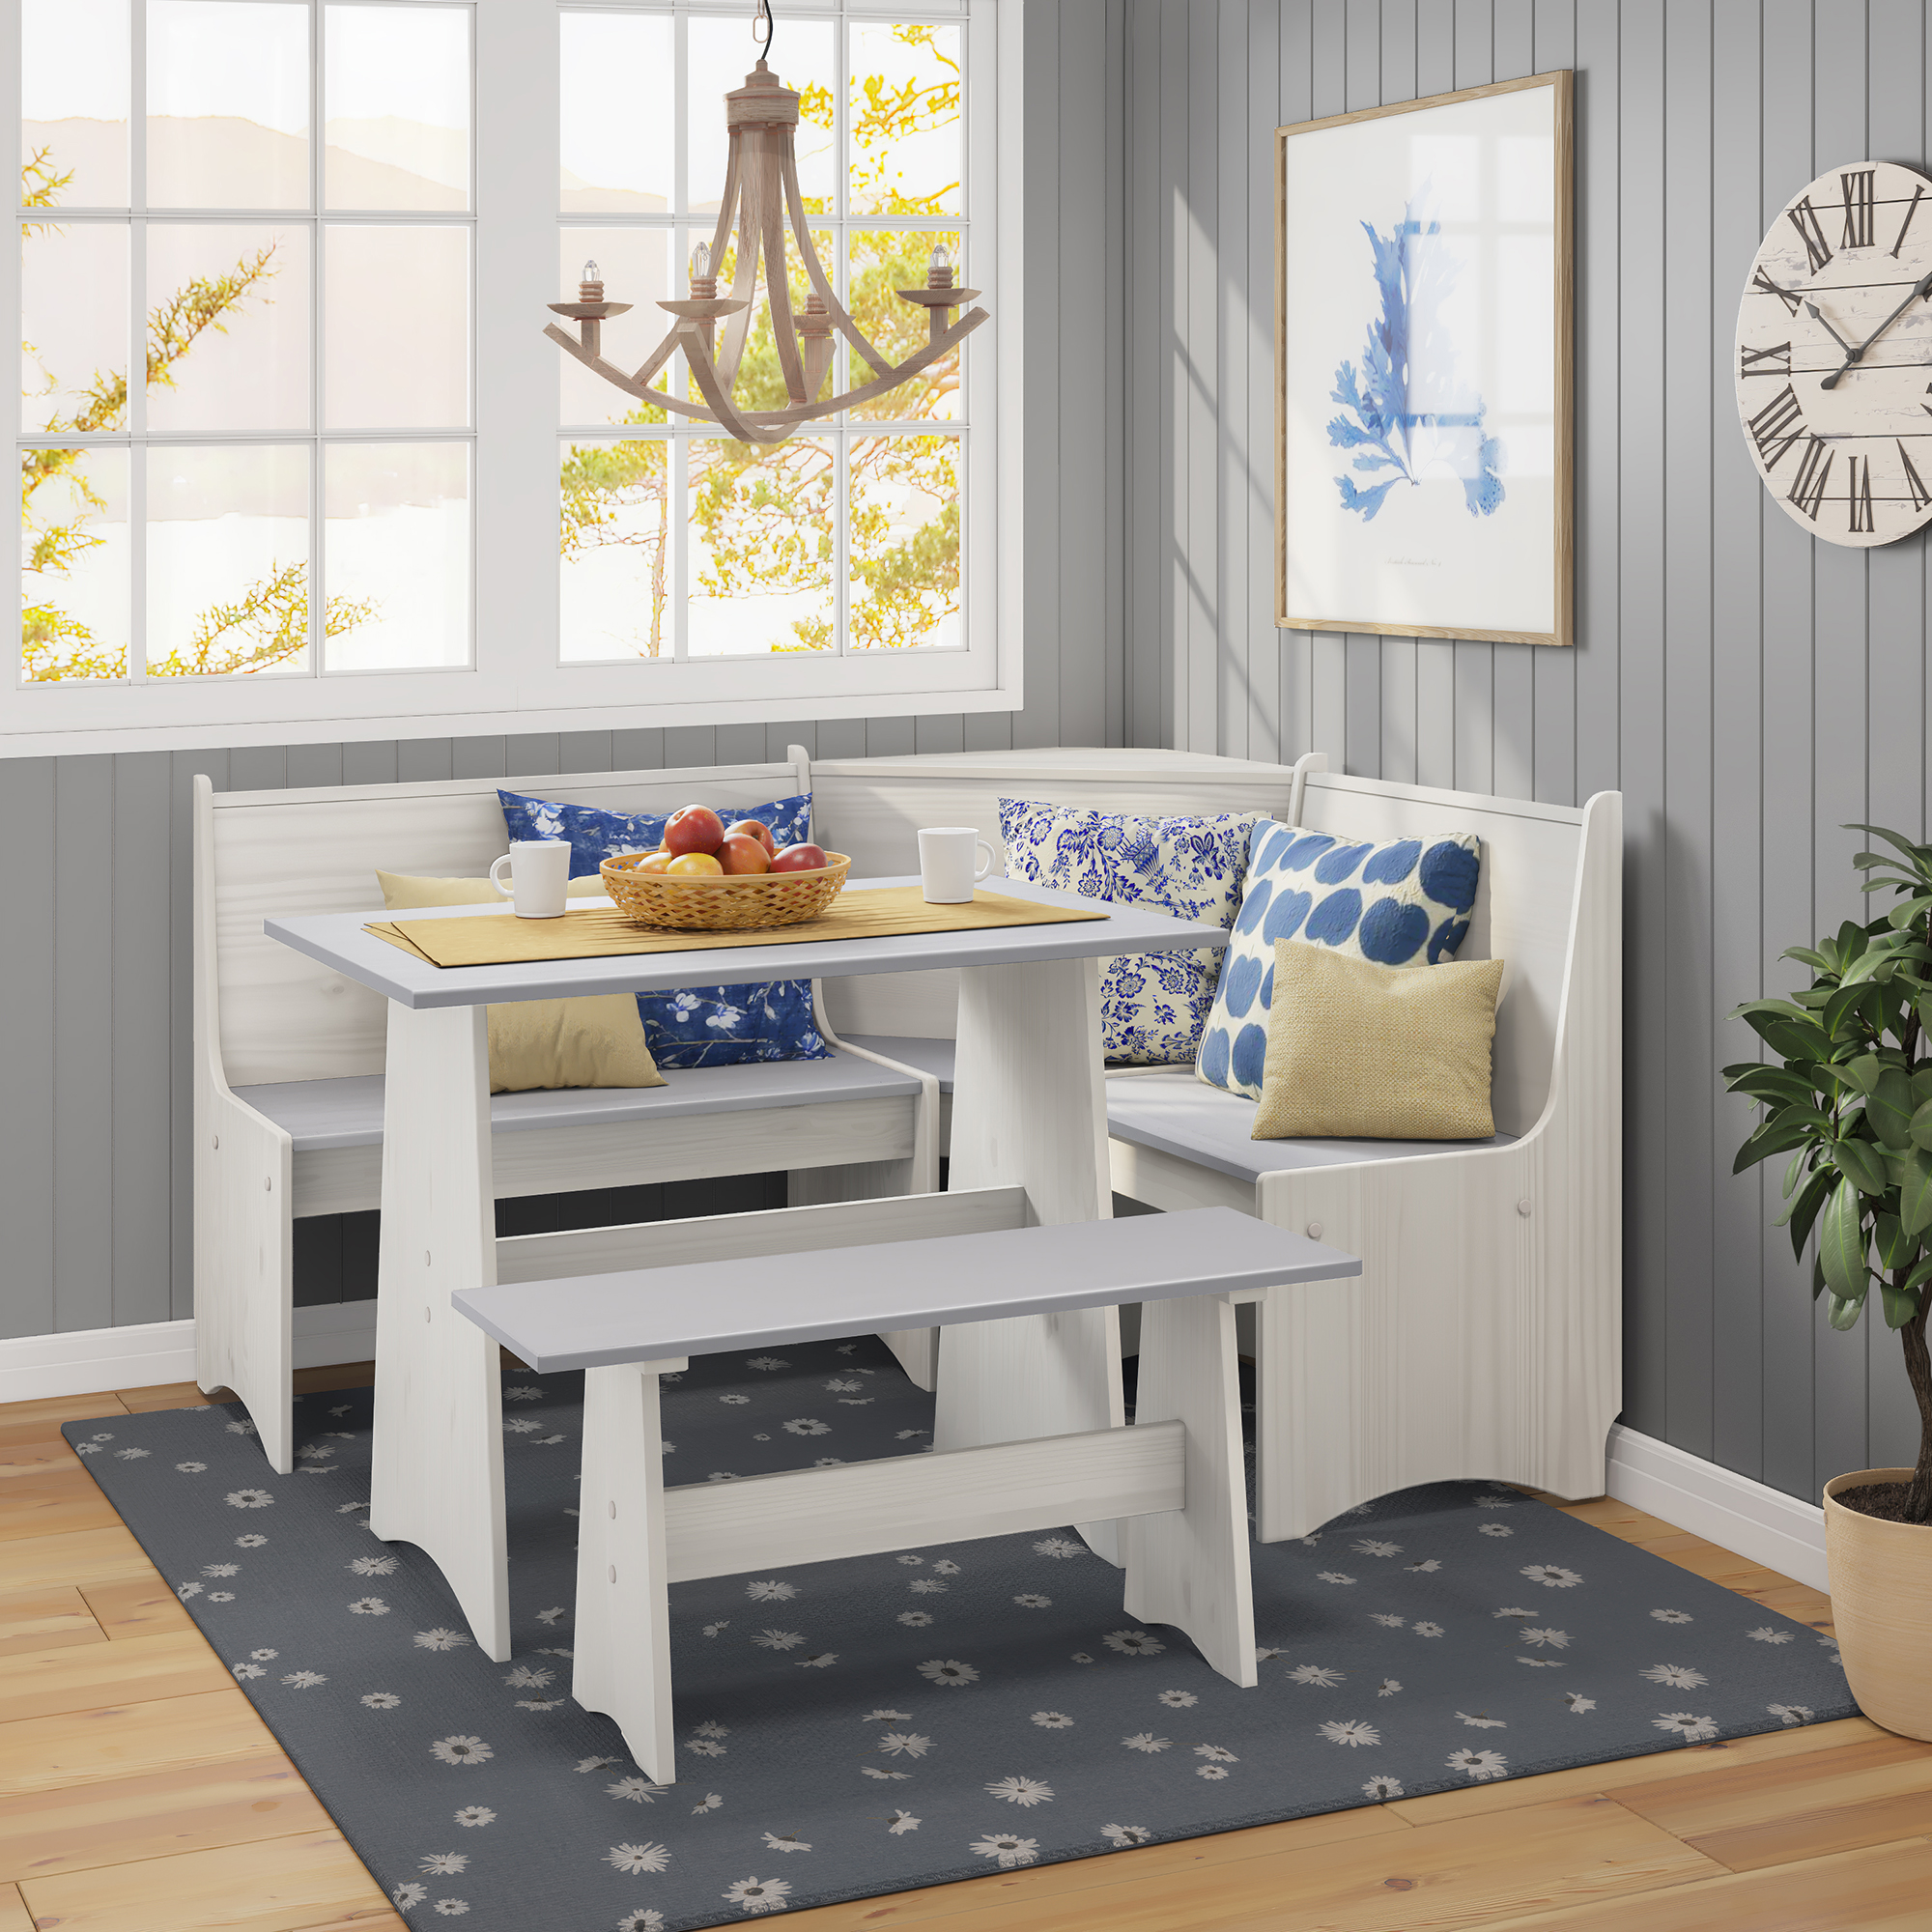 Woven Paths Cottonwood 3-Piece Small Spaces Wood Dining Nook, White/Gray - image 1 of 9